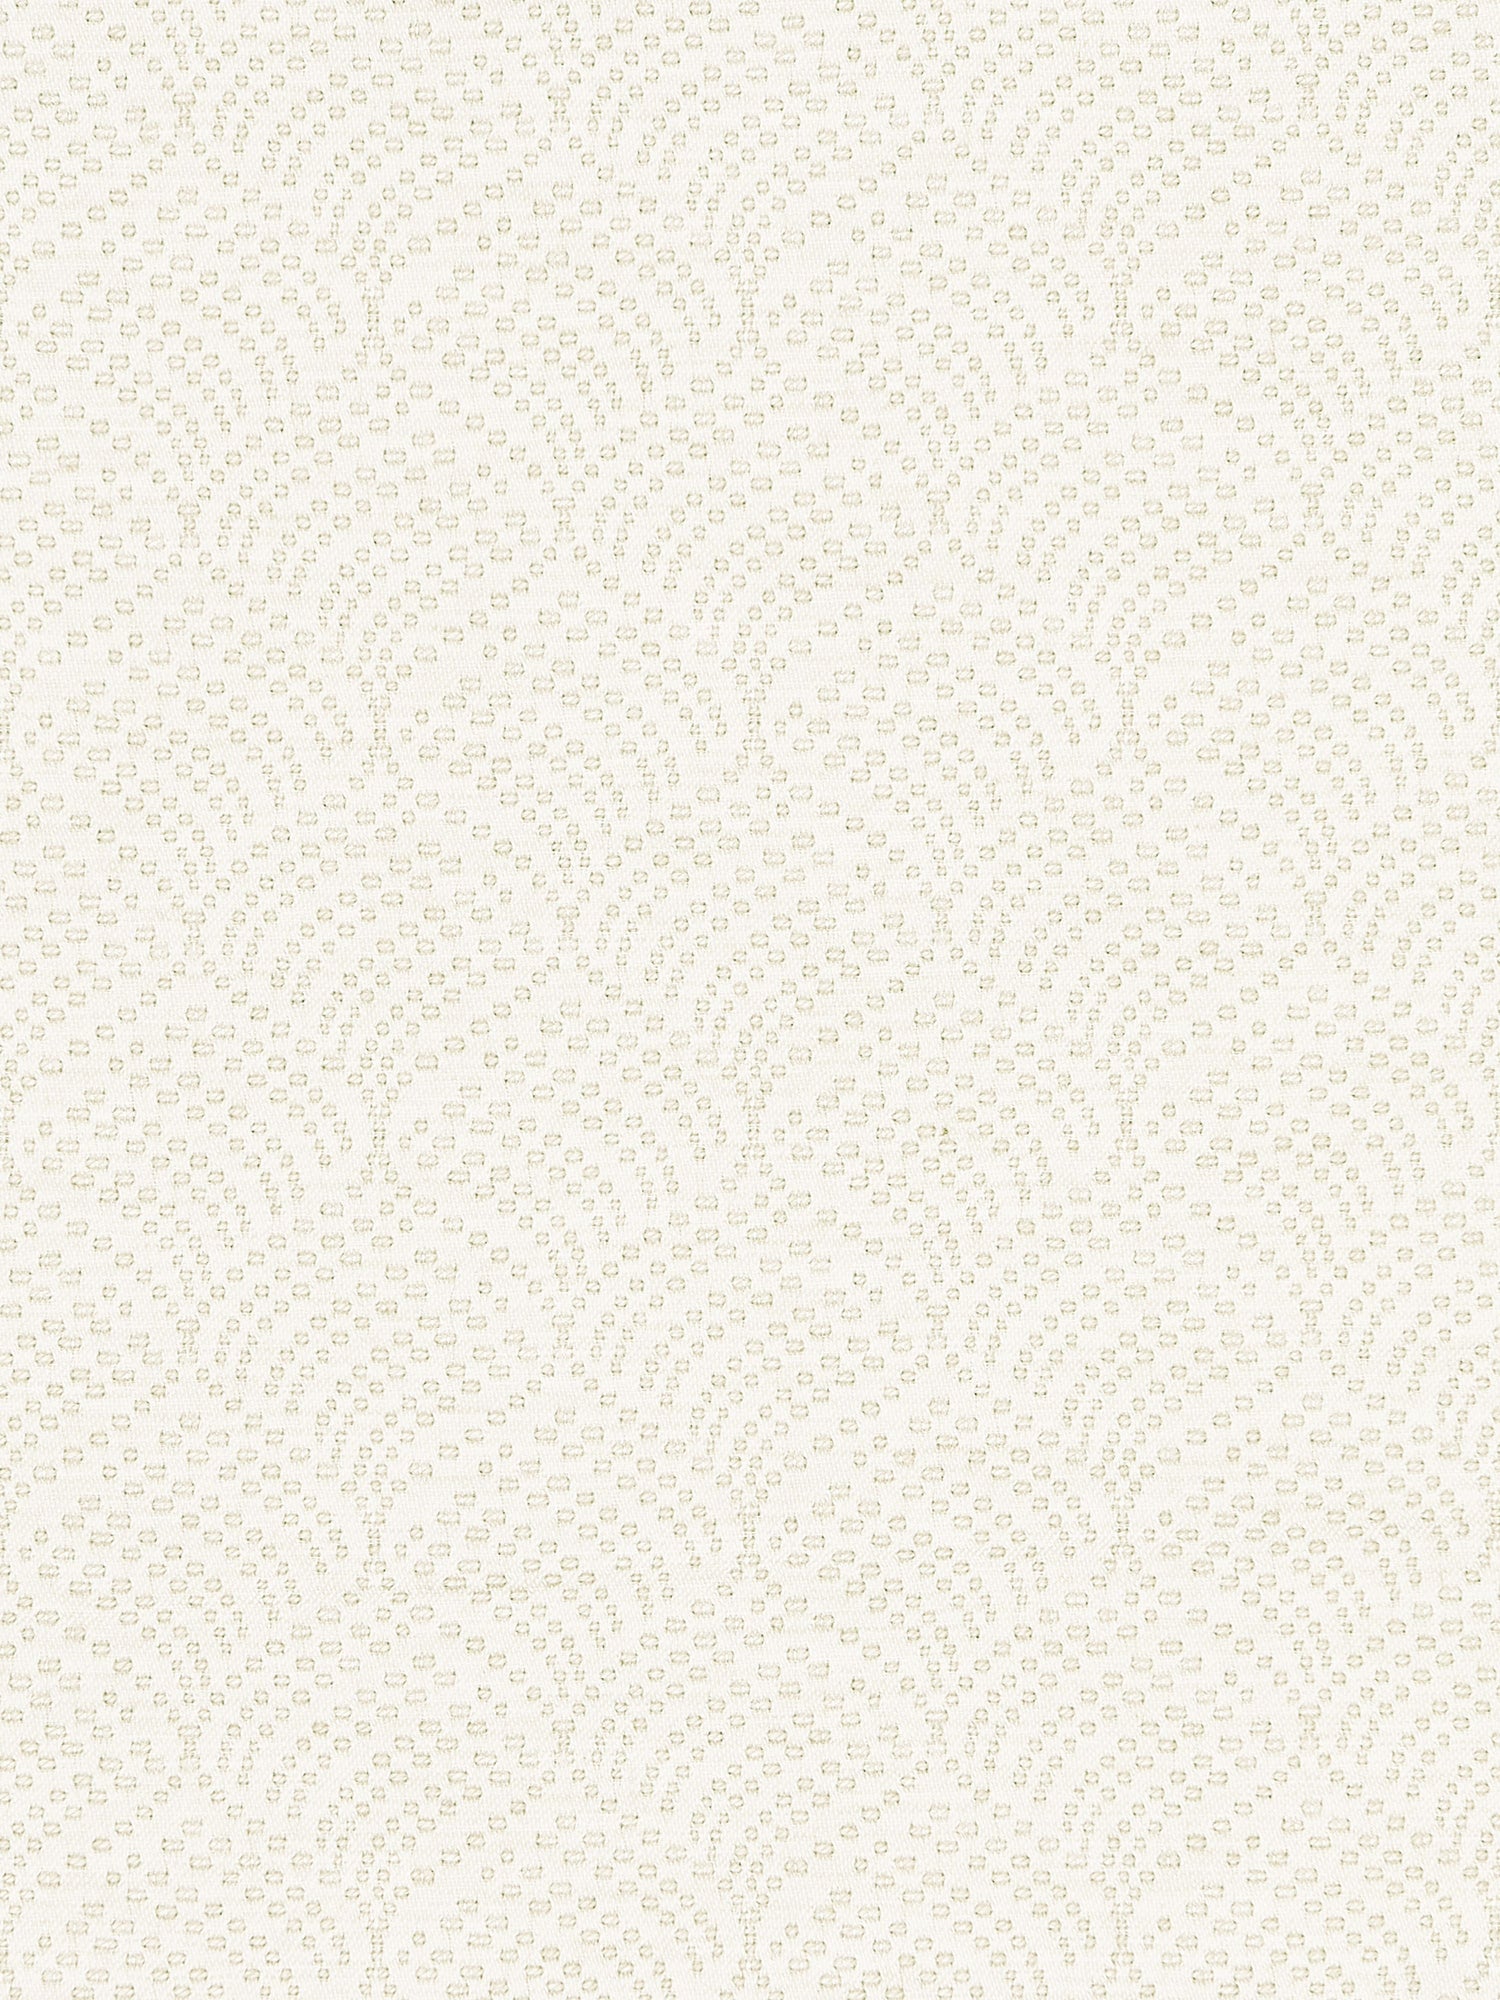 Playa Grande fabric in sand color - pattern number SU 00023616 - by Scalamandre in the Old World Weavers collection